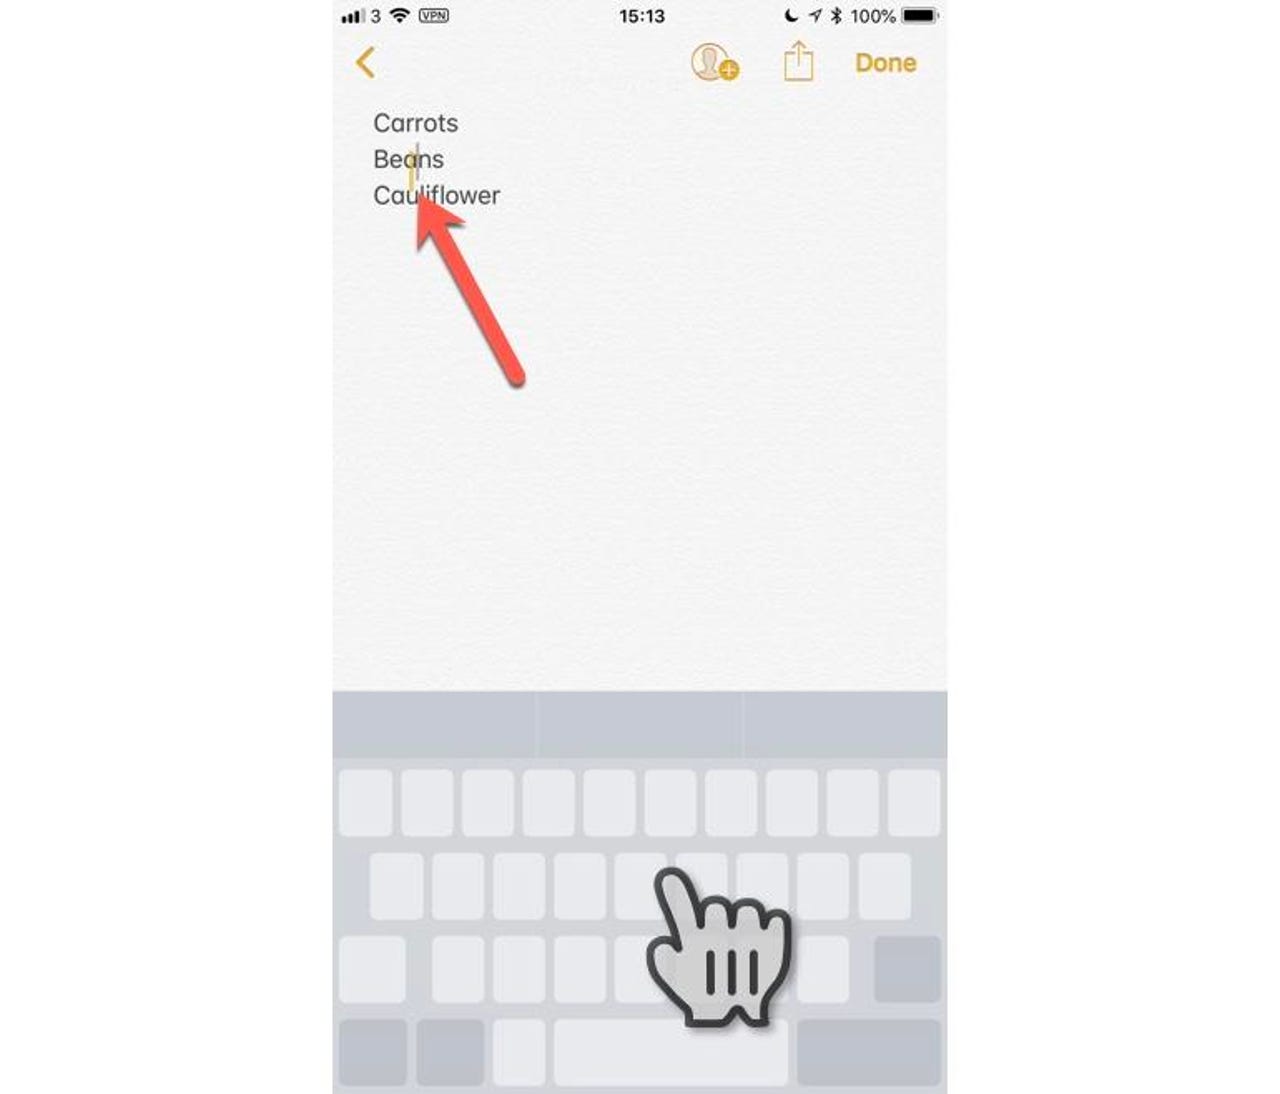 Turn the keyboard into a trackpad